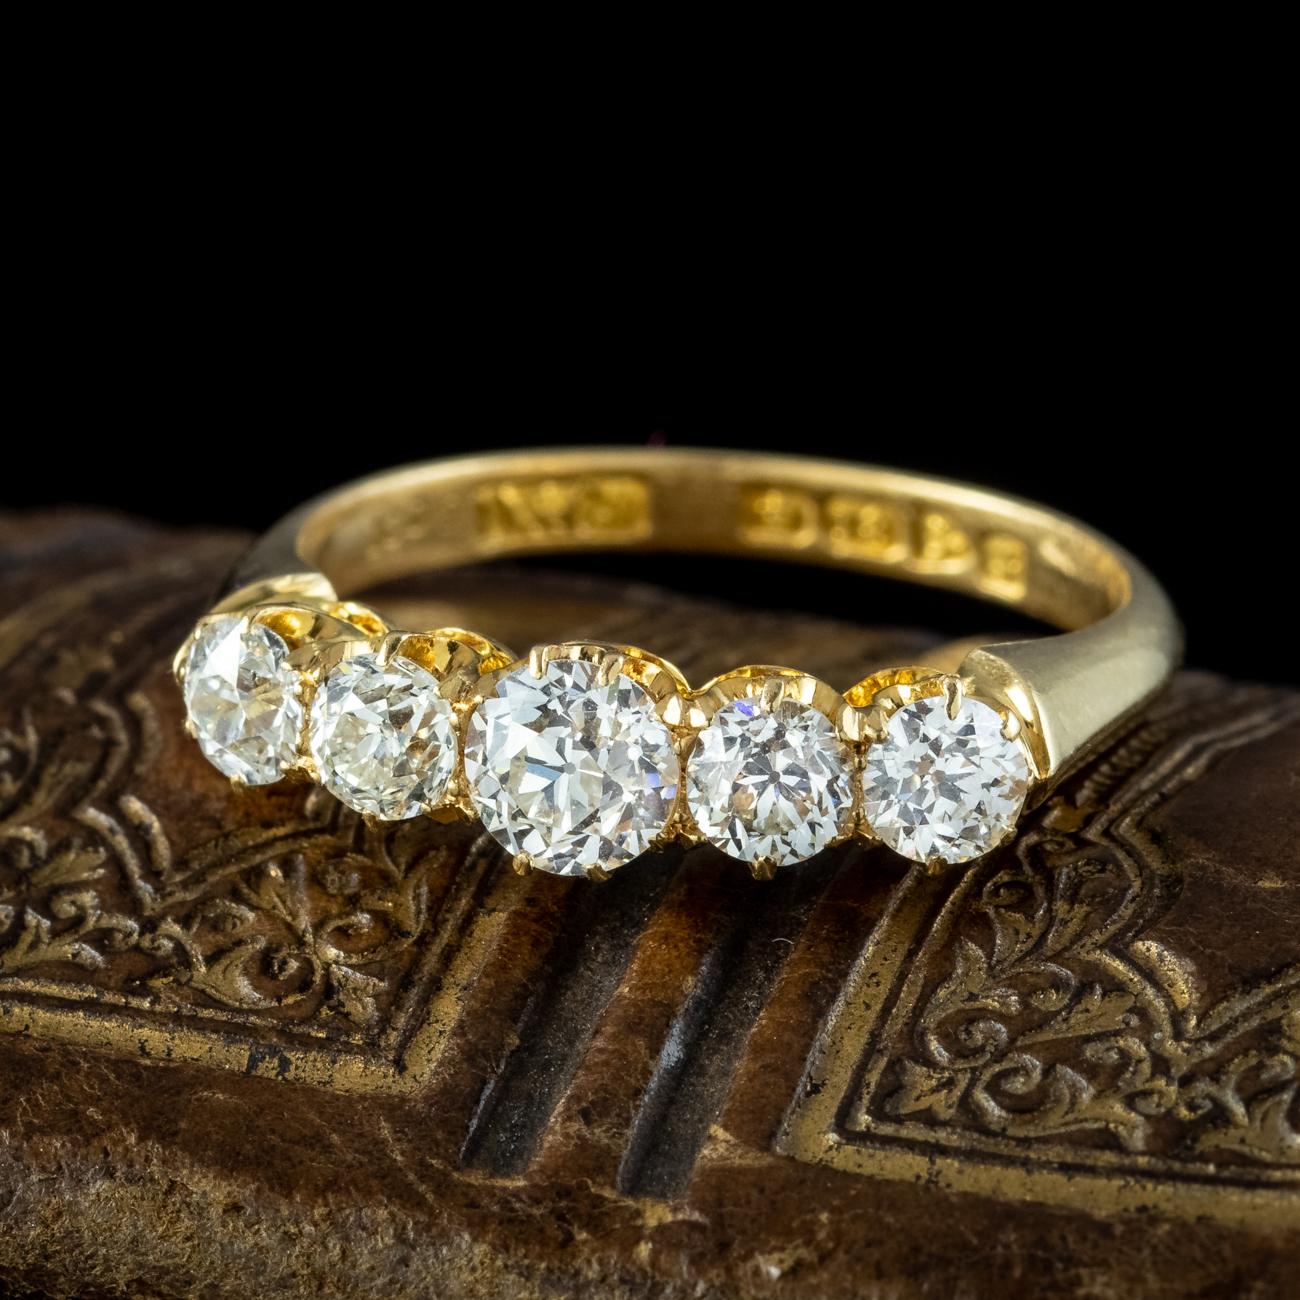 Antique Edwardian Diamond Five Stone Ring 1.4ct Diamond Dated 1909 For Sale 3